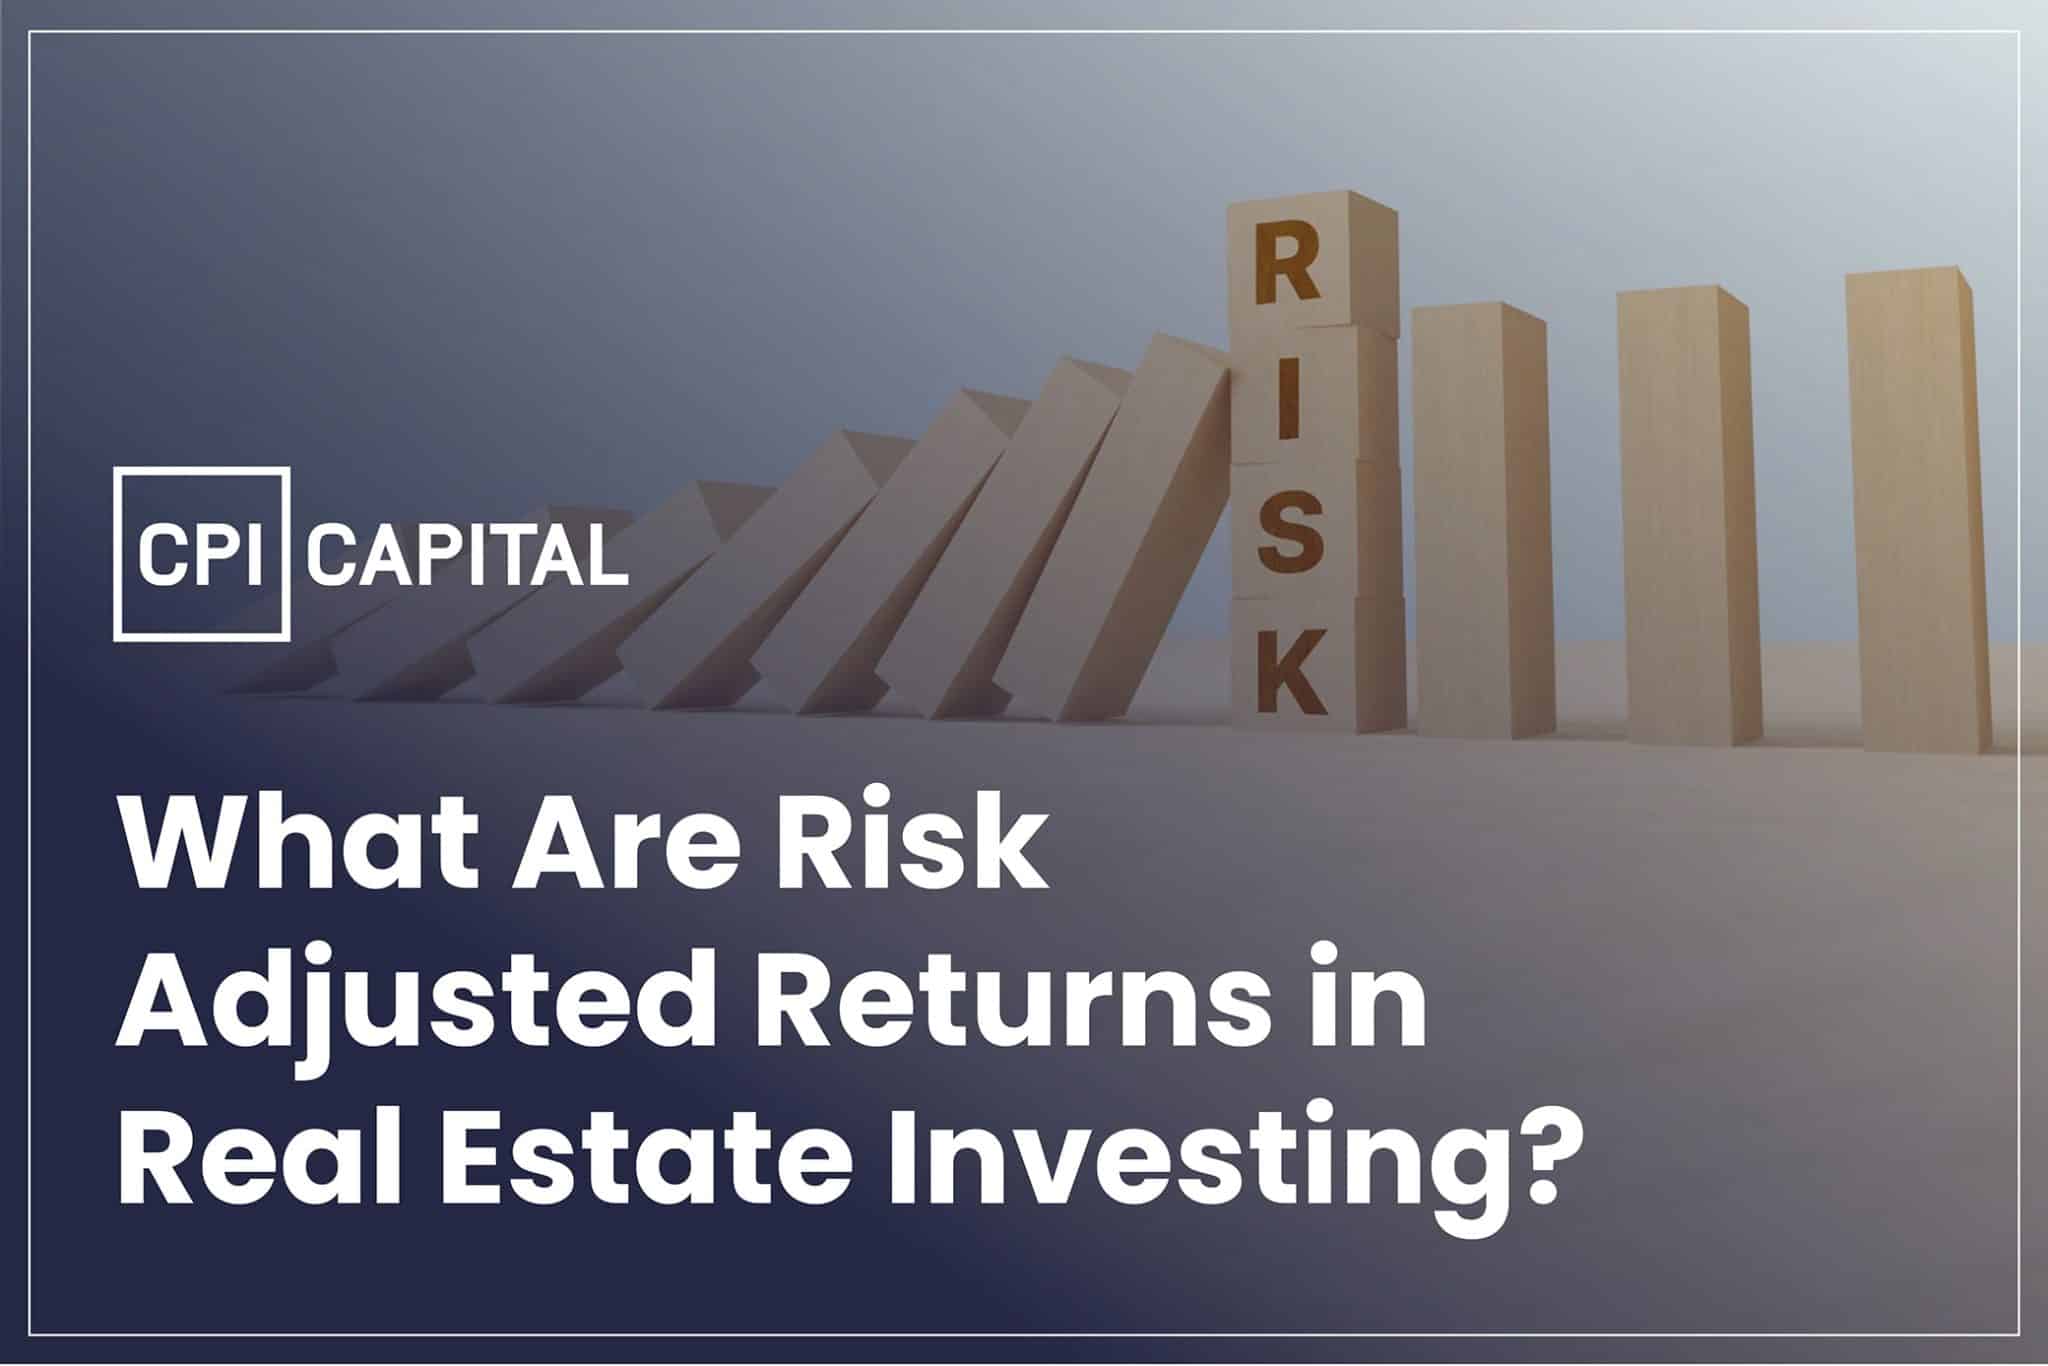 What are Risk Adjusted Returns in real estate investing?